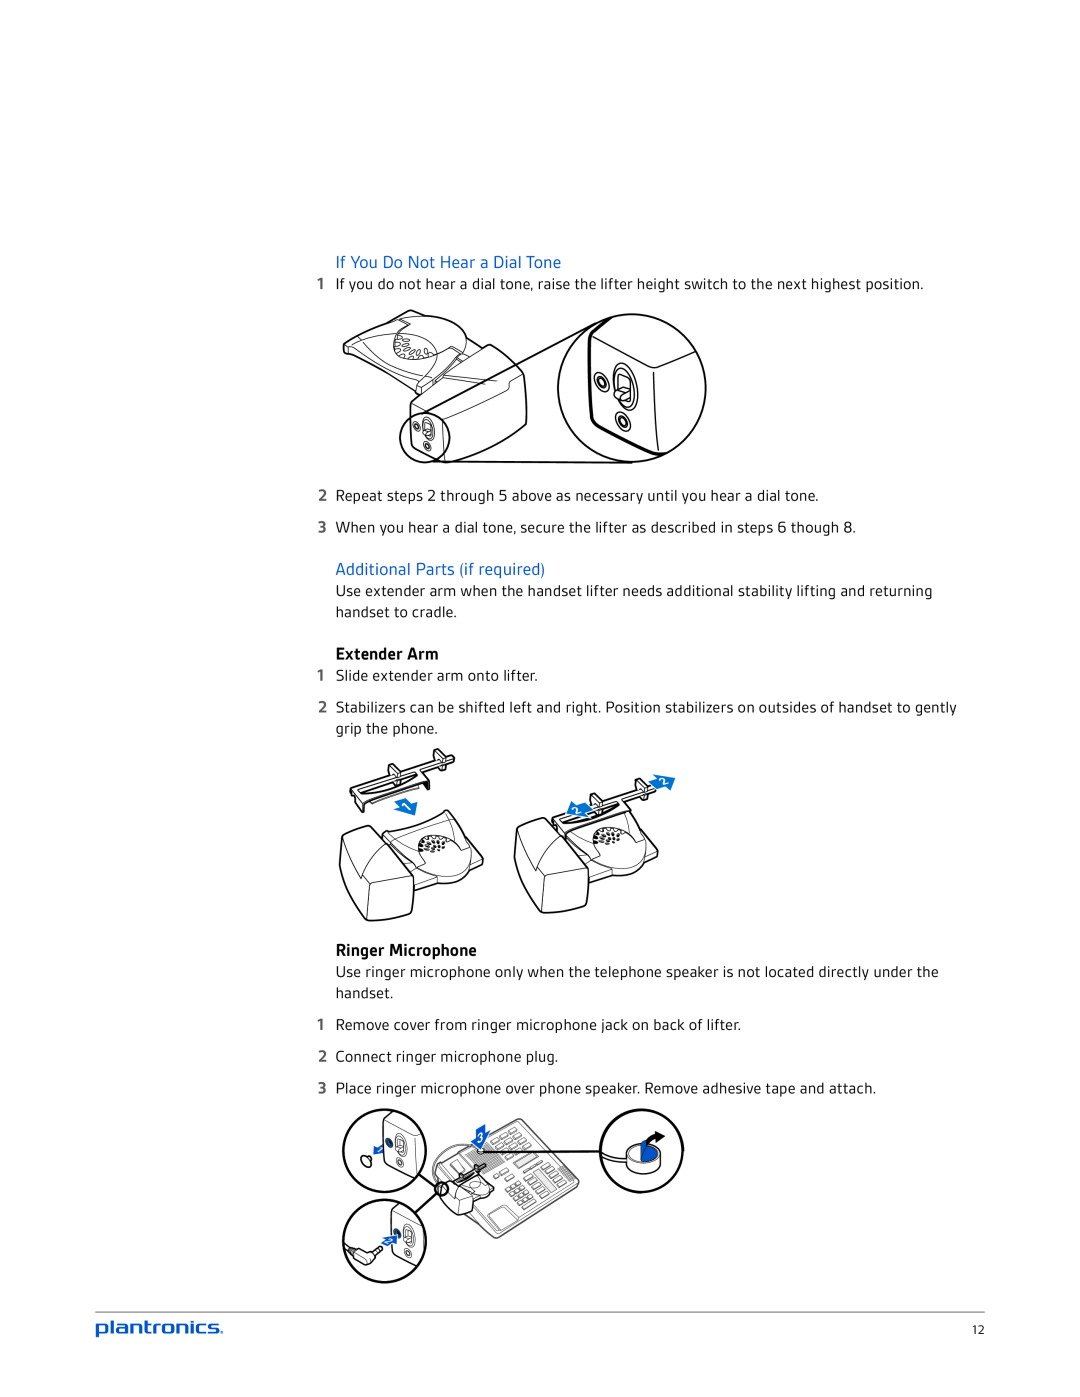 Plantronics CS520 manual If You Do Not Hear a Dial Tone, Additional Parts if required, Extender Arm, Ringer Microphone 